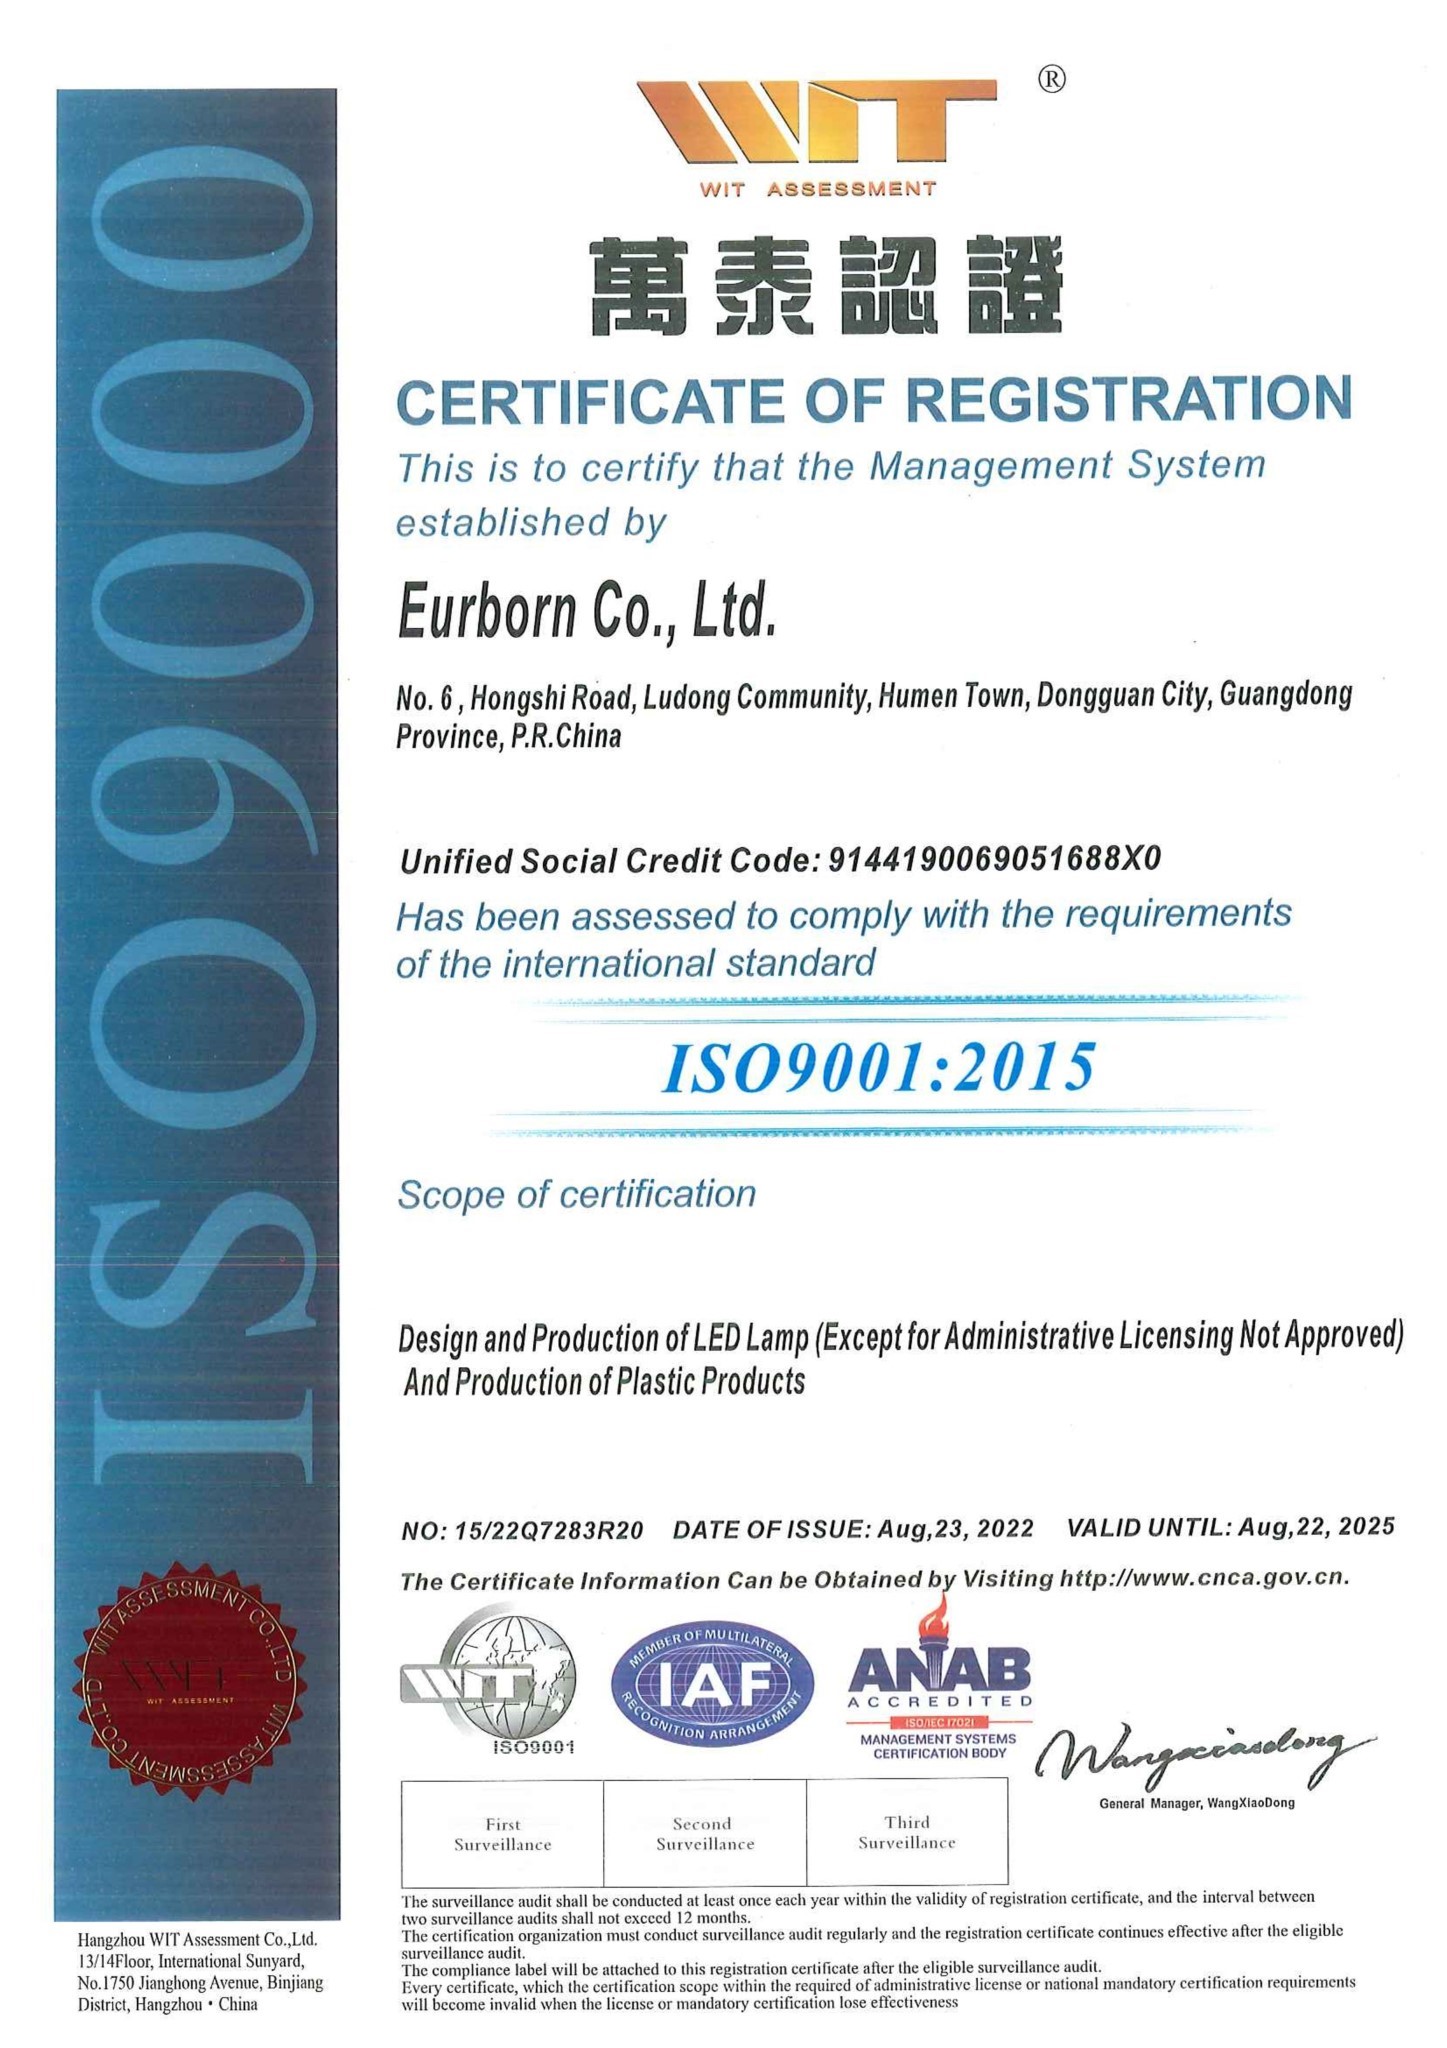 2022.08.23 Eurborn started to pass ISO9001 certificate, also it has been renewed continuously.